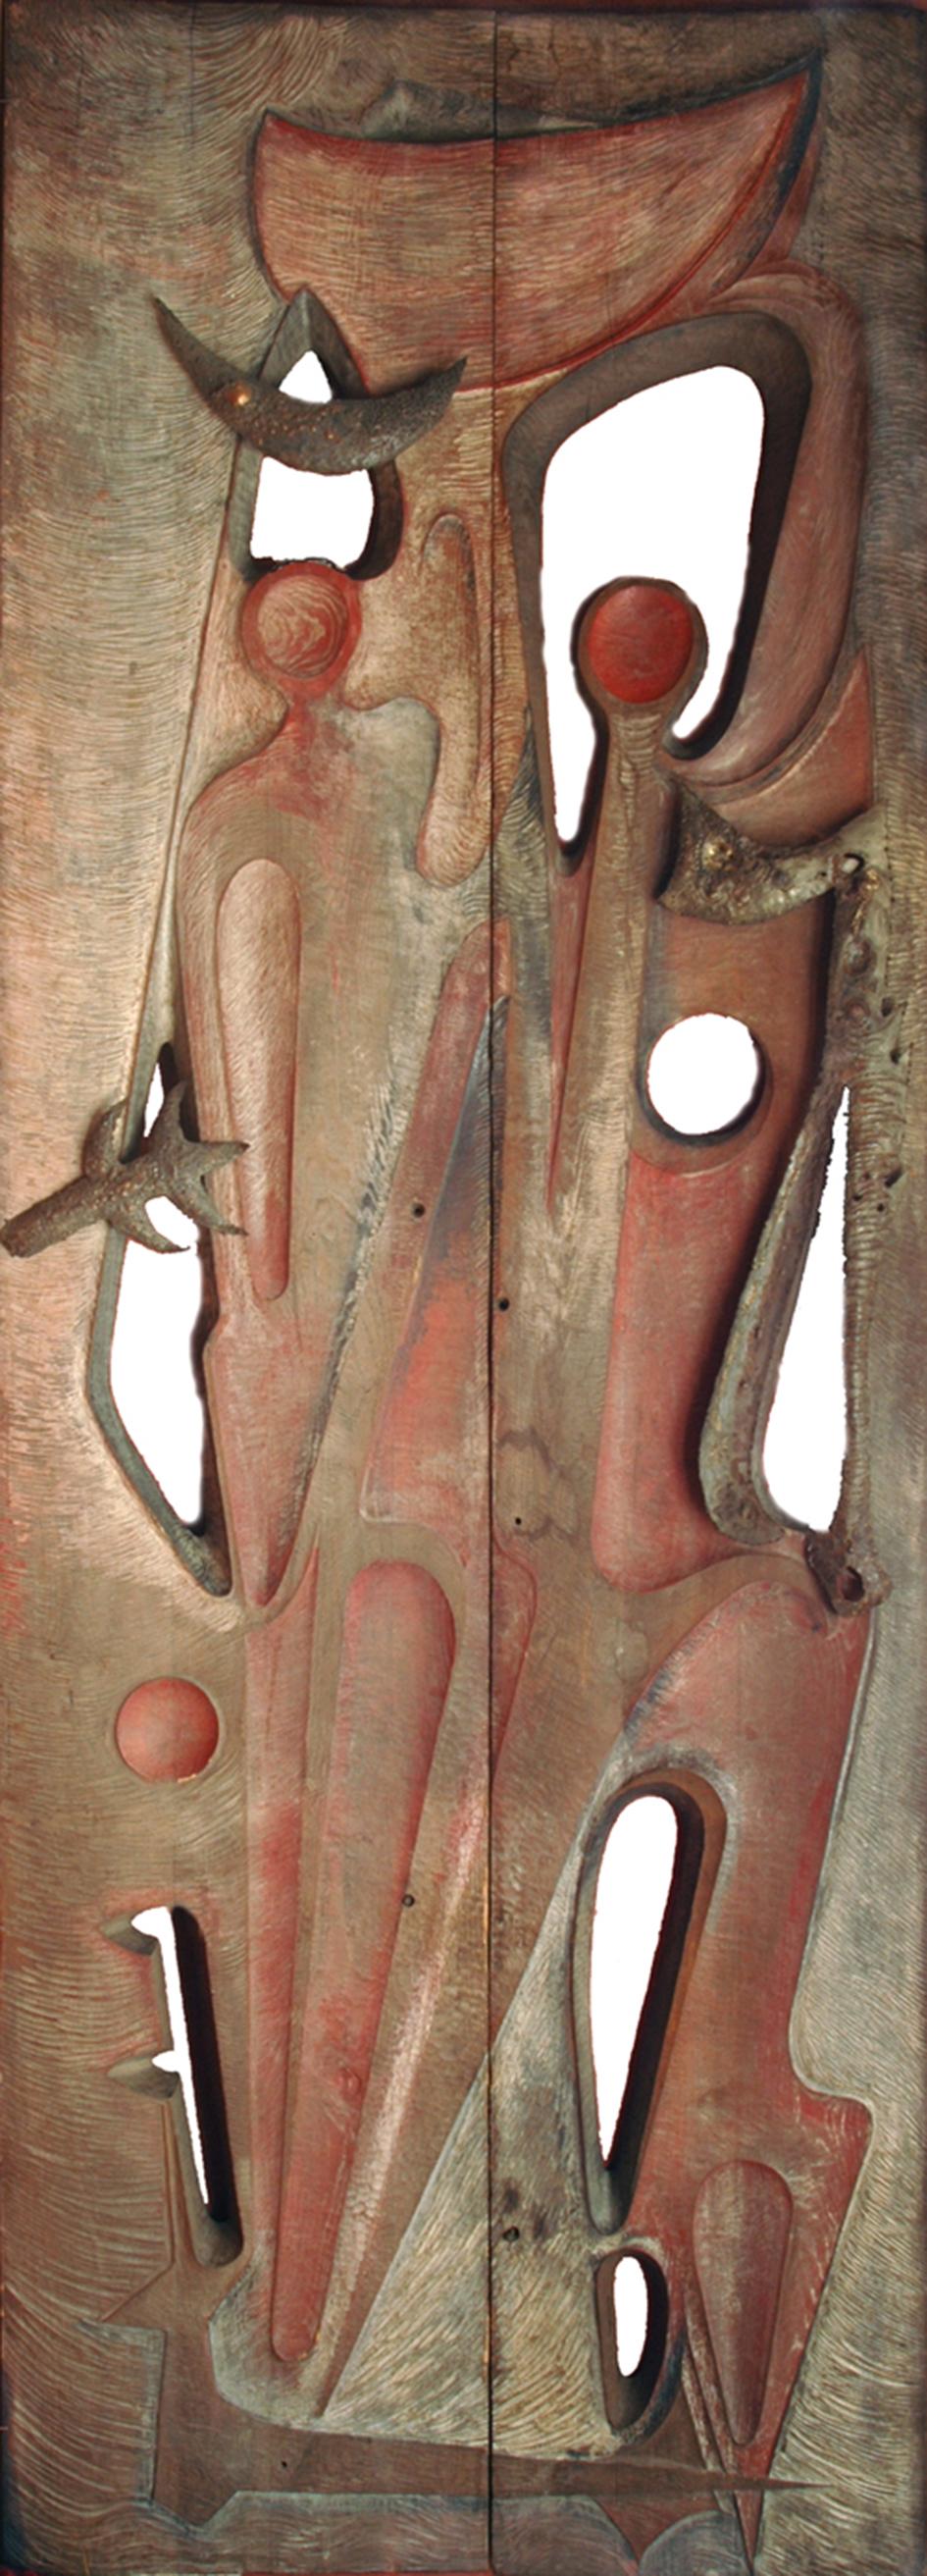 Gilbert de Smet. Born in 1932 to Erembodegem in Belgium
Monumental sculpted door, 1969. Carved oak and metal parts
These doors were exhibited in 1969 at the Blanckenberge Casino, with fifteen other sculptures and forty drawings. His works show his